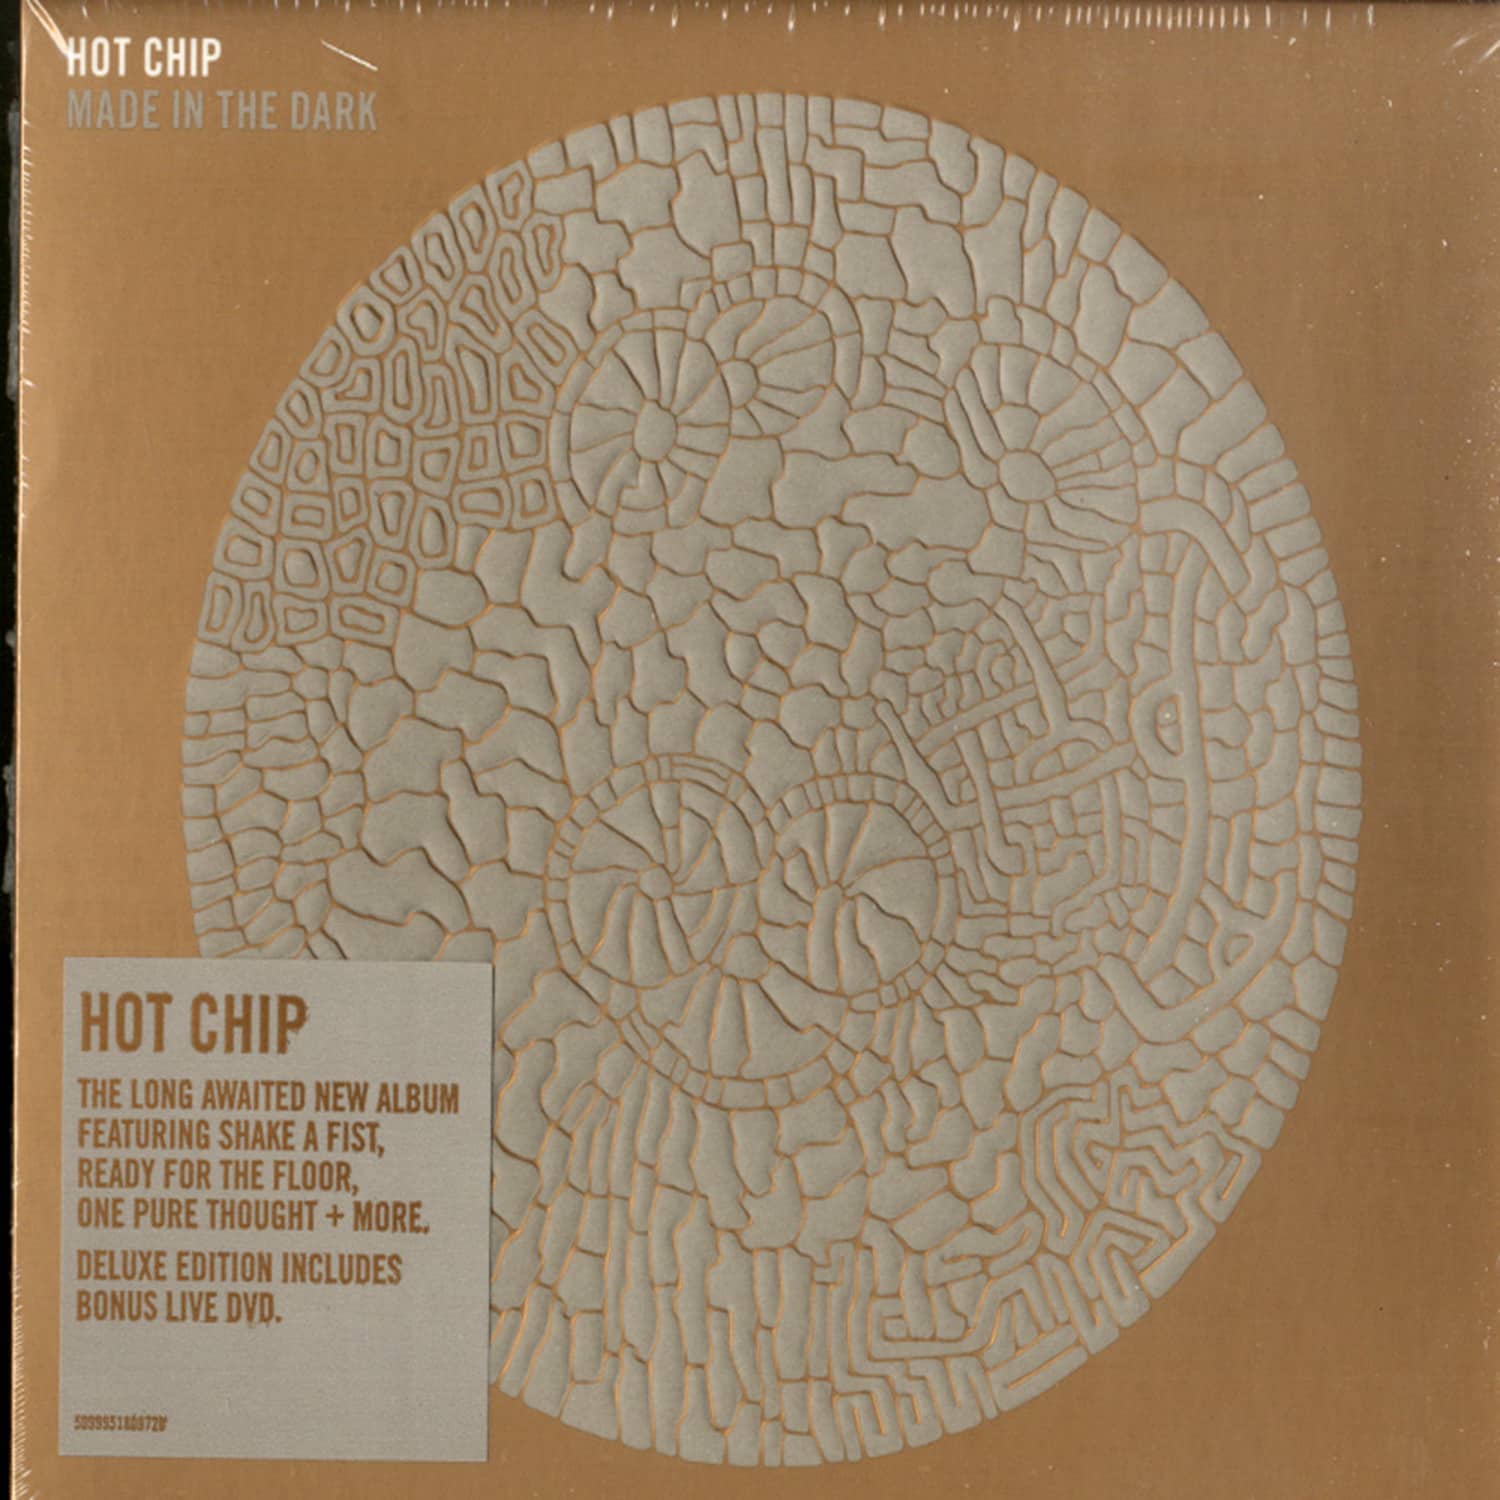 Hot Chip - MADE IN THE DARK 